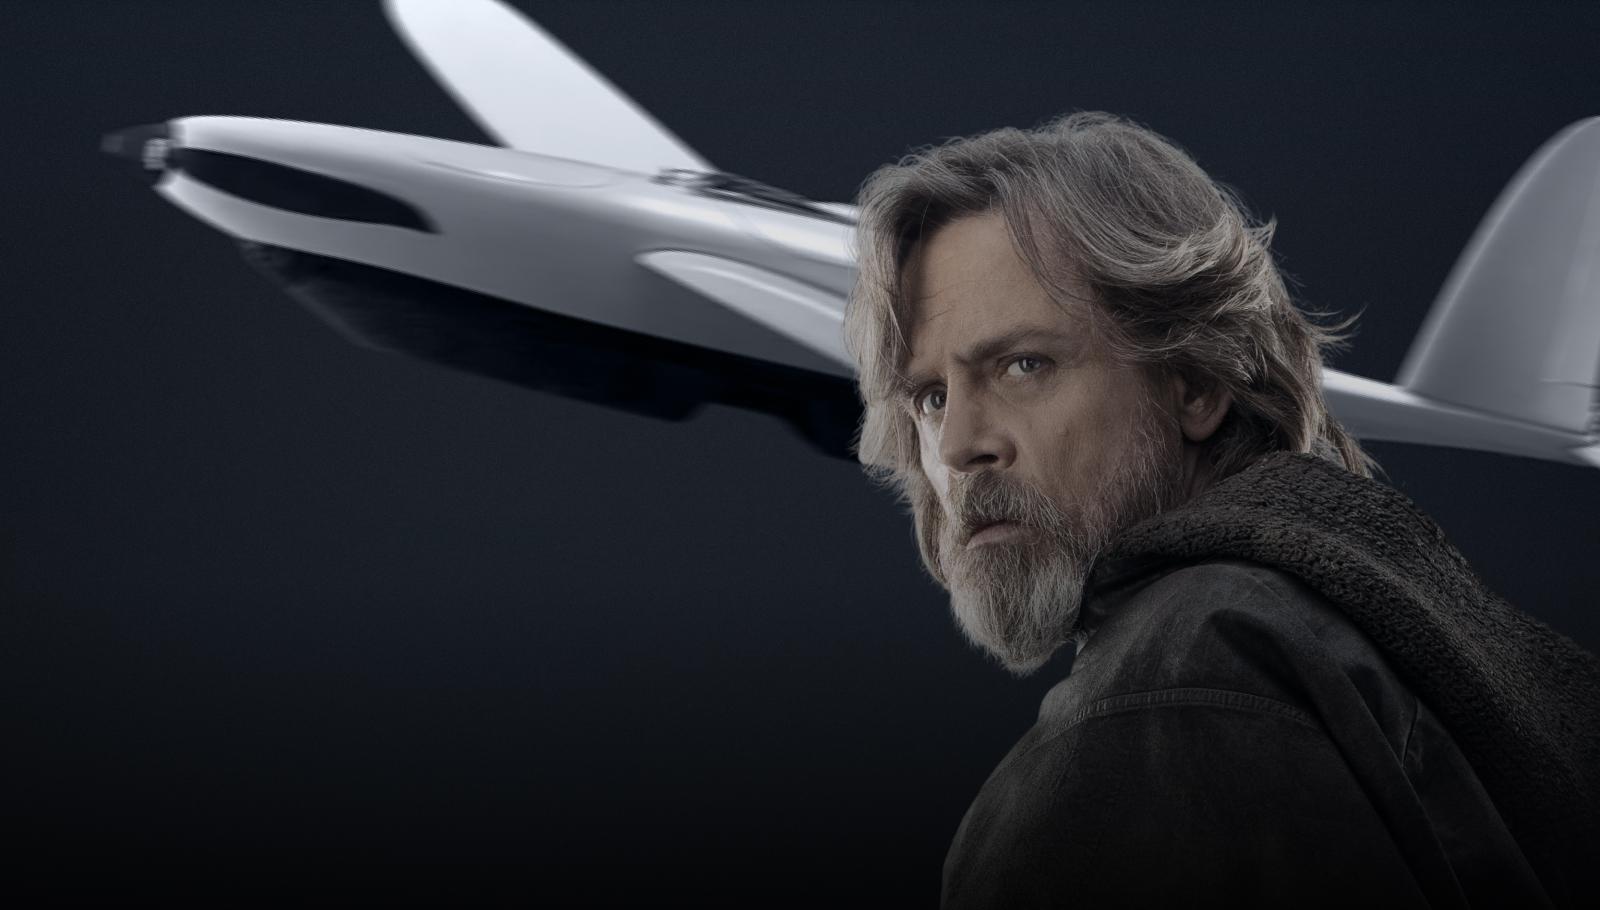 JOIN MARK HAMILL AND THE ARMY OF DRONES!